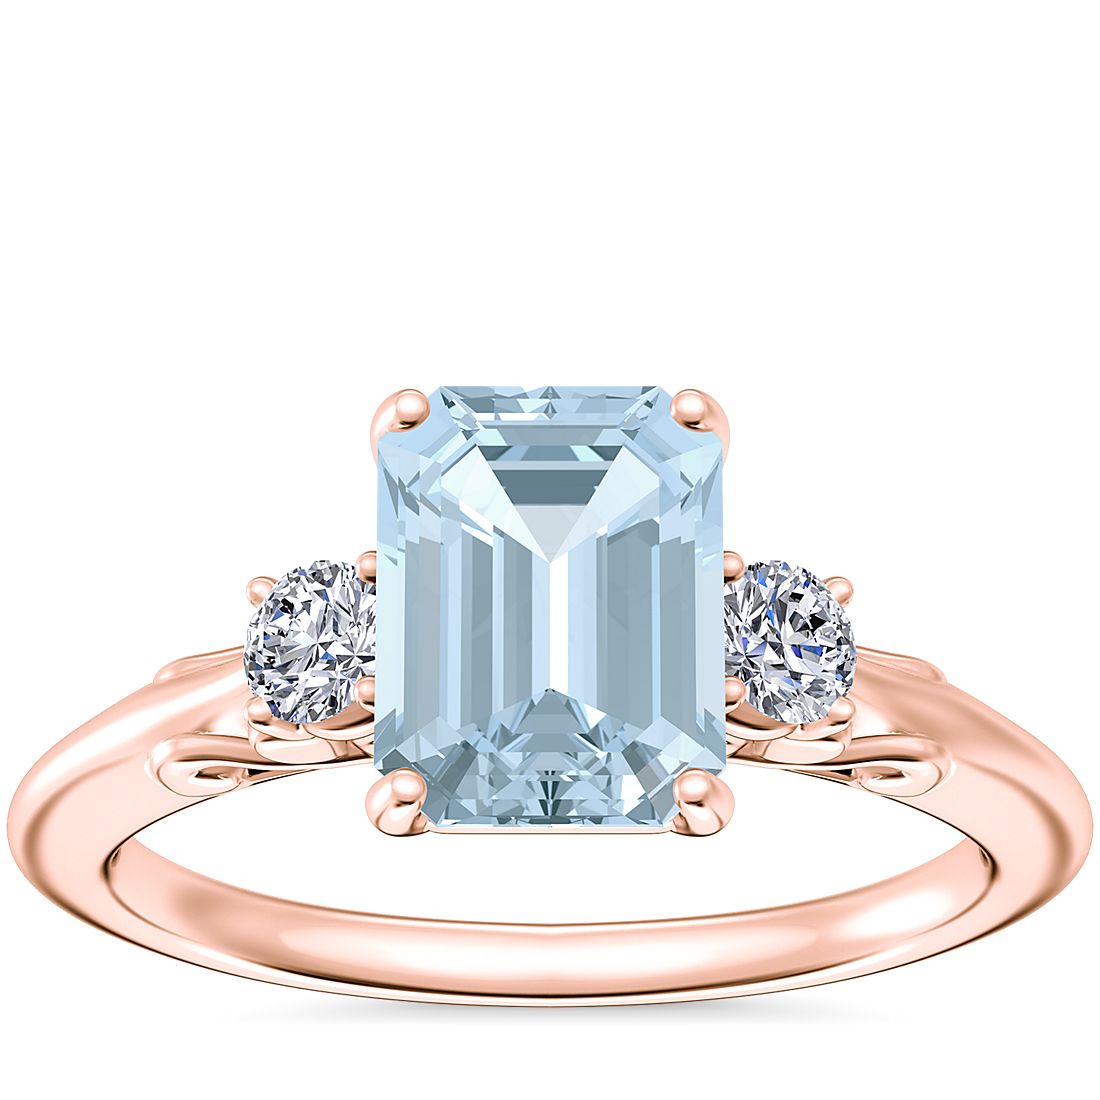 Vintage Three Stone Engagement Ring with Emerald-Cut Aquamarine in 14k Rose Gold (8x6mm)